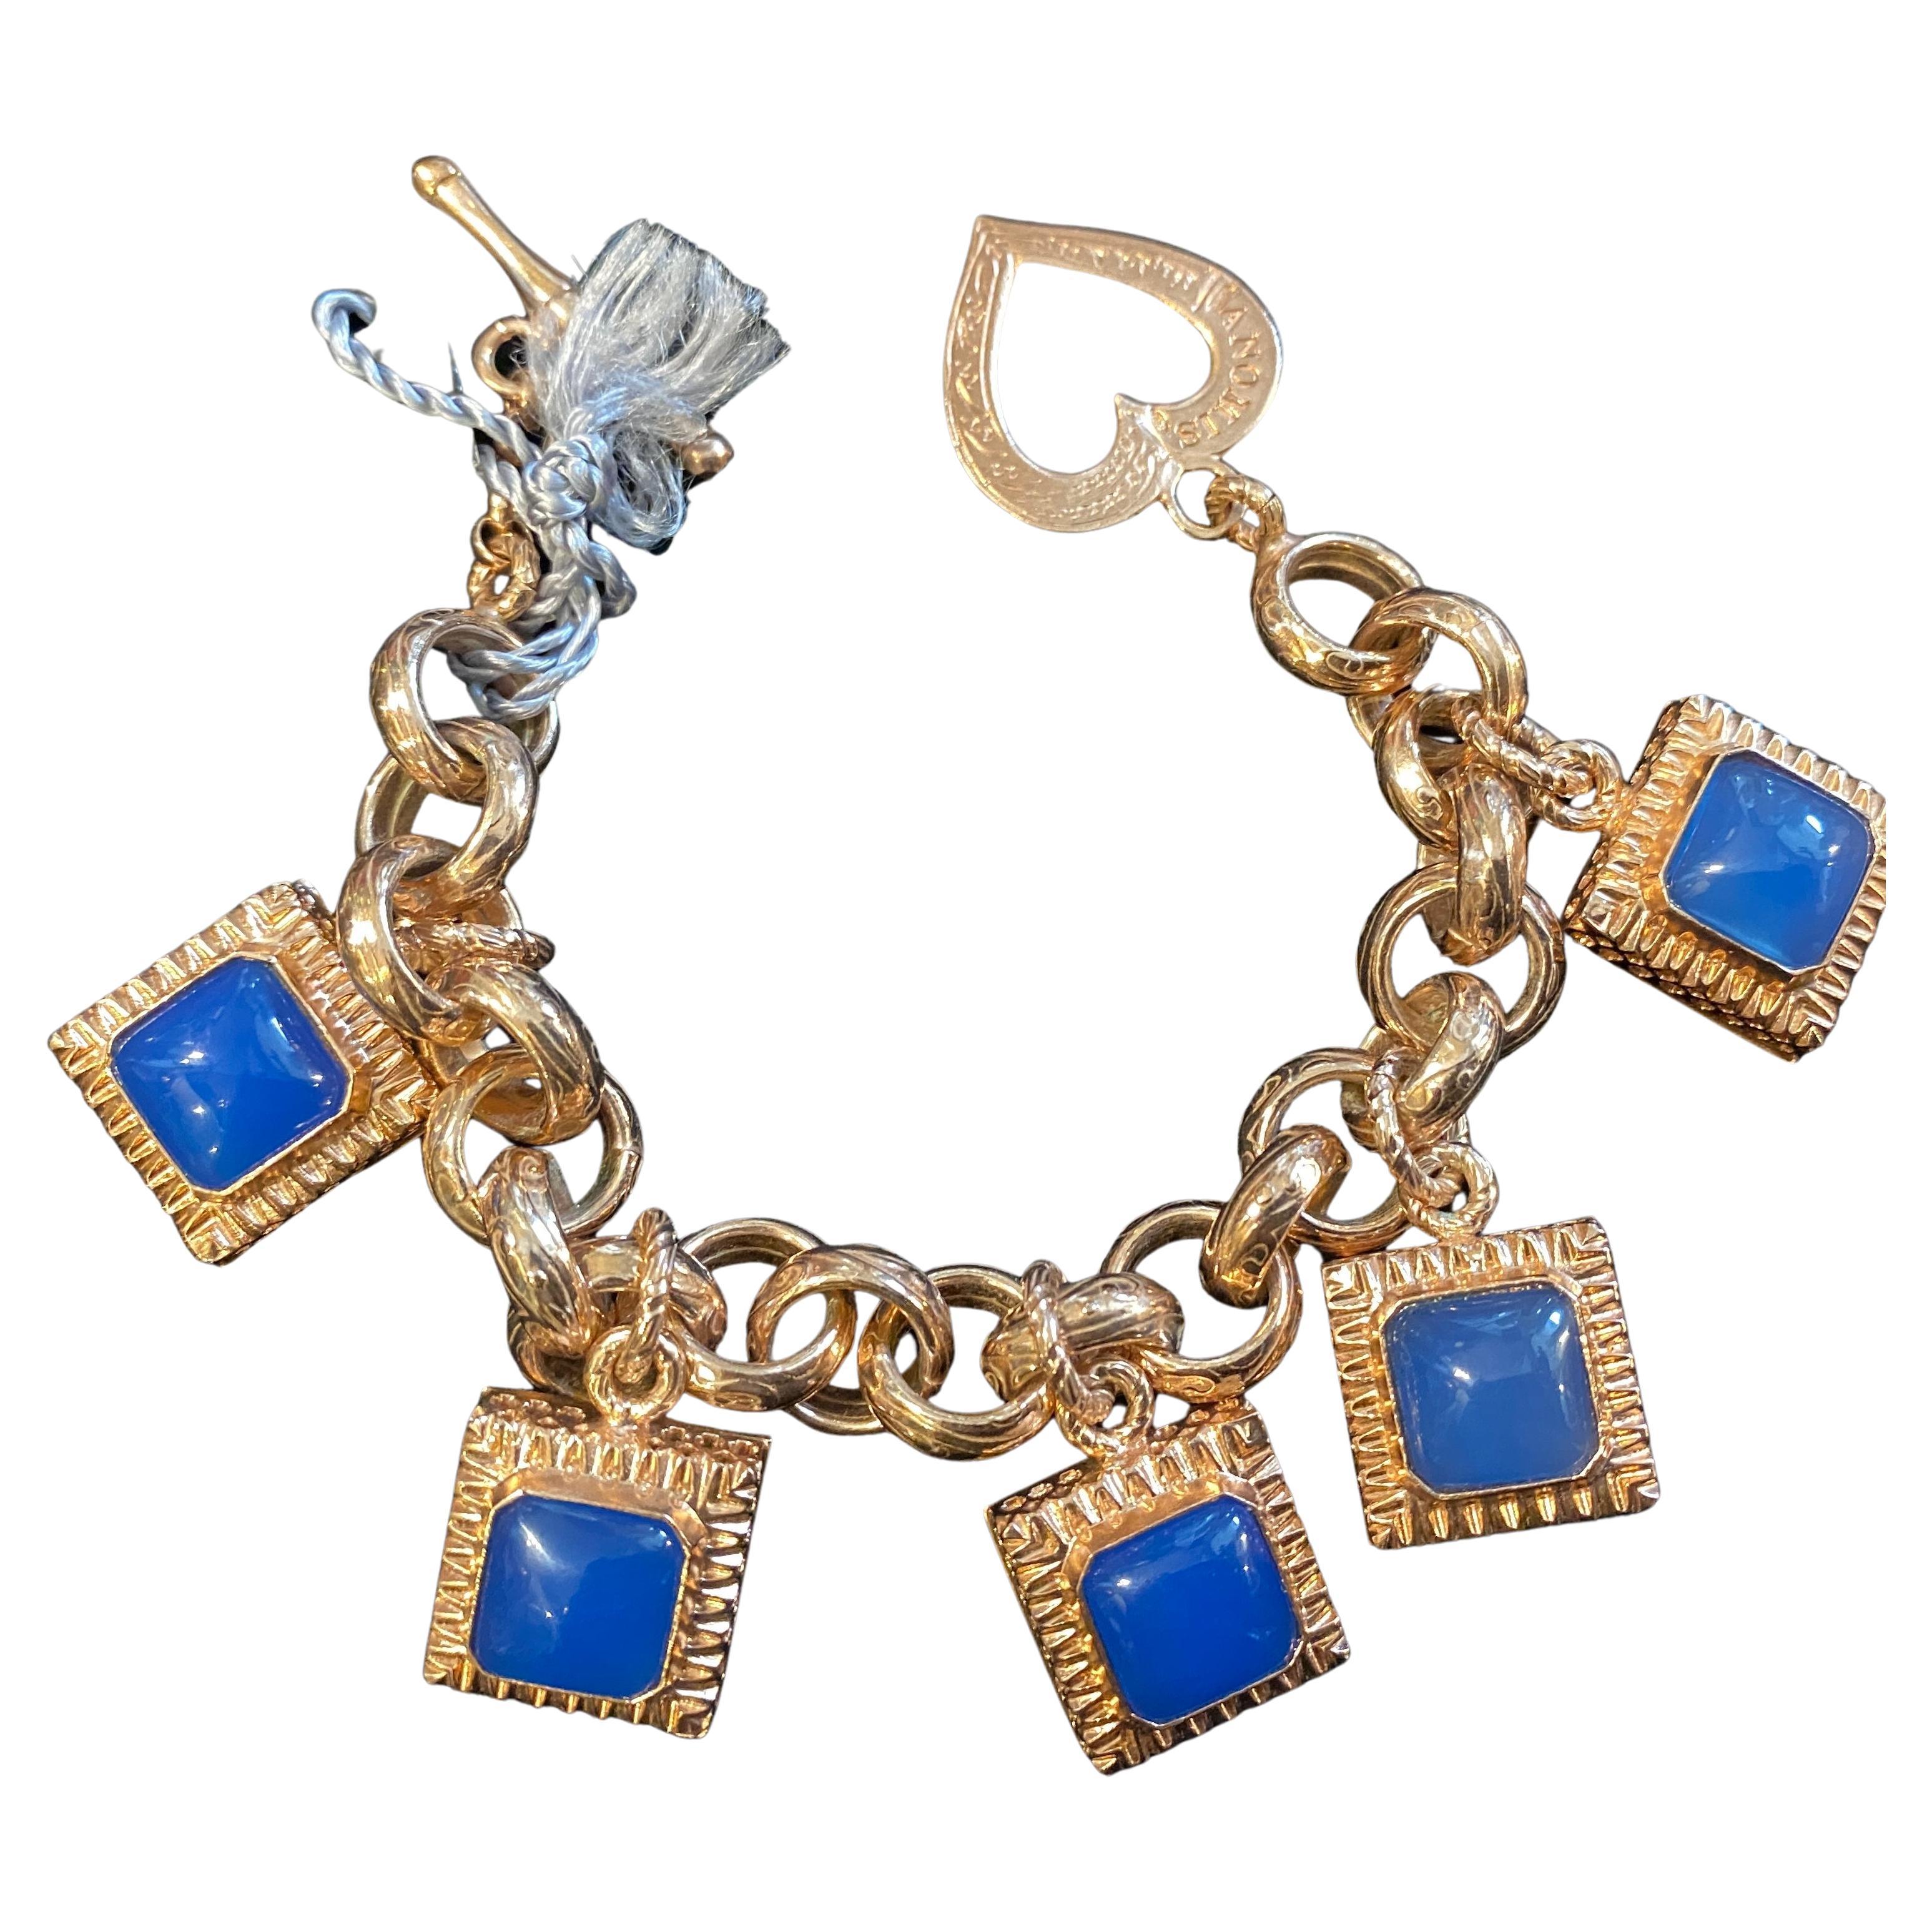 1990s Sterling Silver and Square Blue Agate Cabochon Italian Charm Bracelet